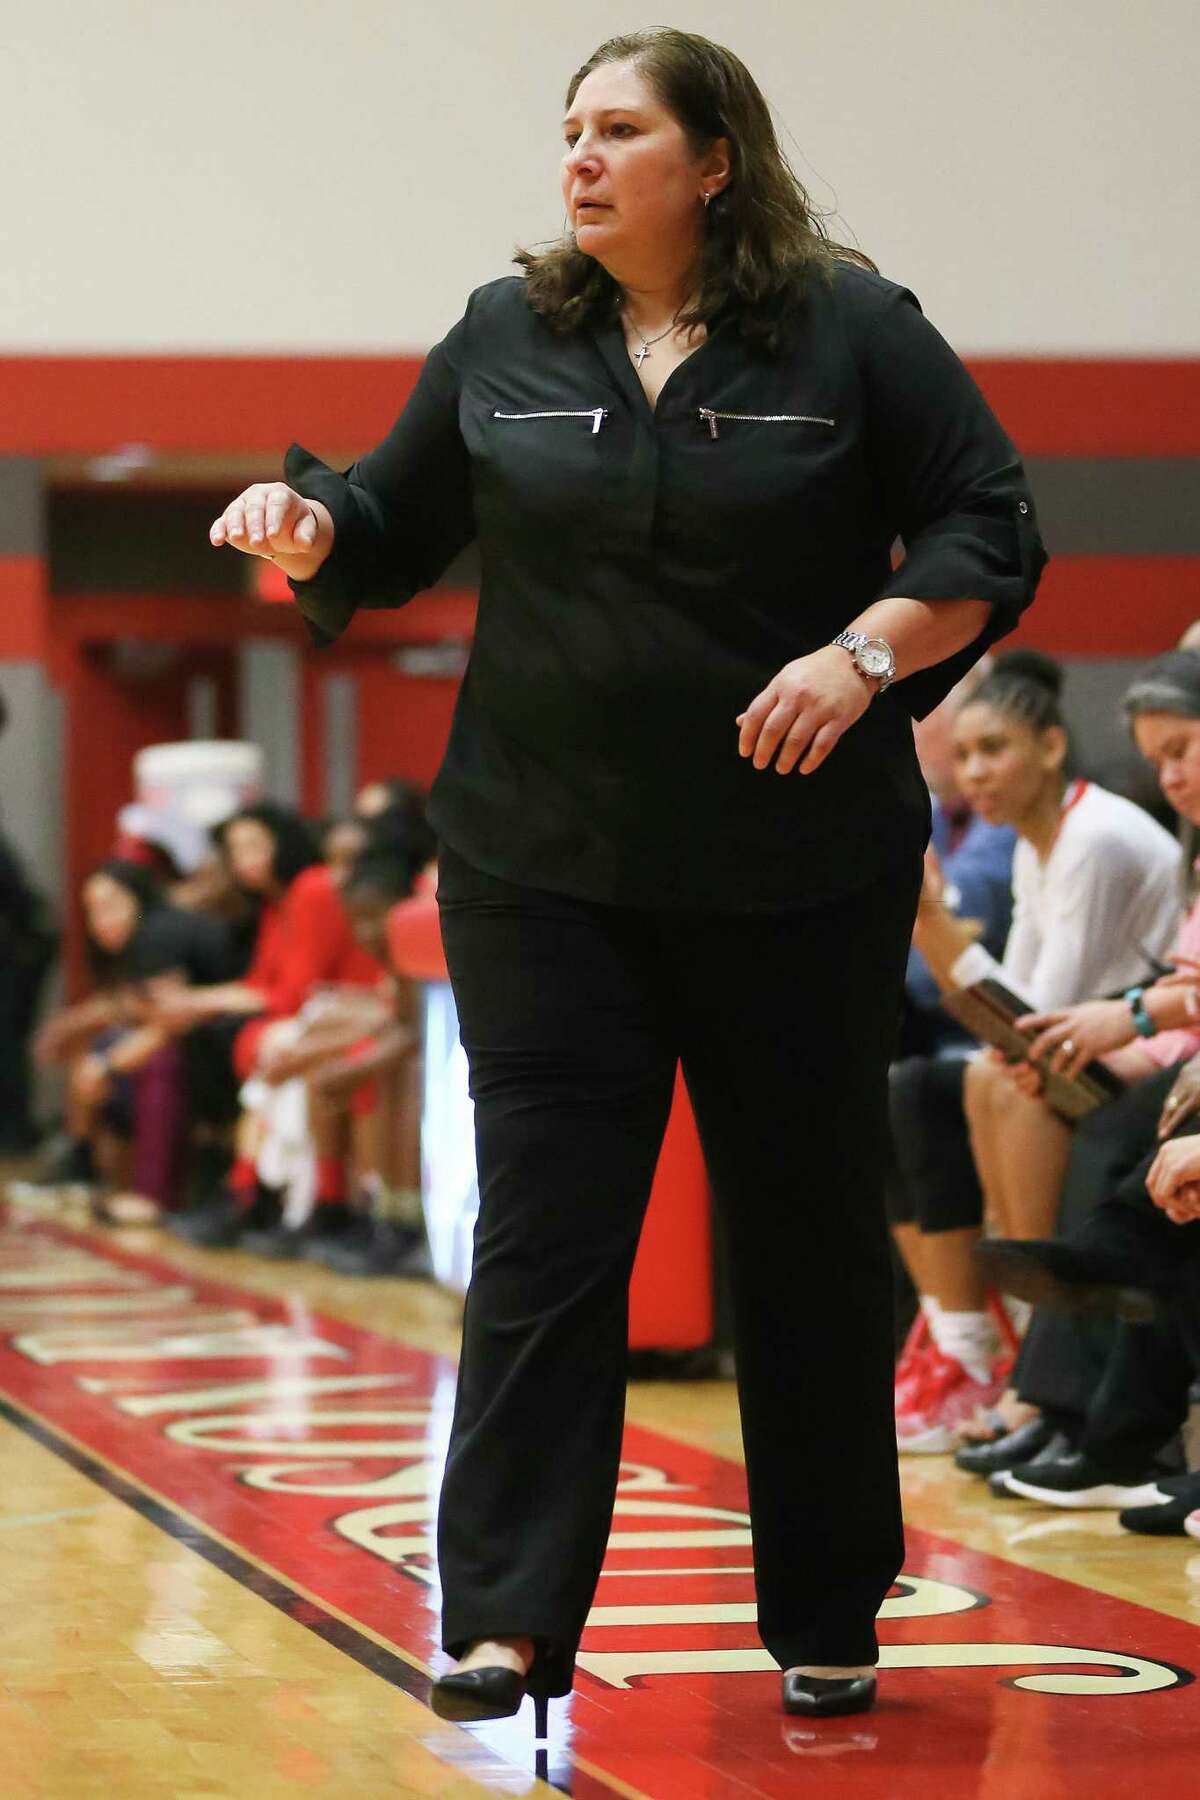 Judson coach Triva Corrales on the sideline during the second half of their District 27-6A girls basketball game with Wagner at Judson on Tuesday, Jan. 10, 2017. Judson beat Wagner 55-35 to remain undefeated in district play. MARVIN PFEIFFER/ mpfeiffer@express-news.net